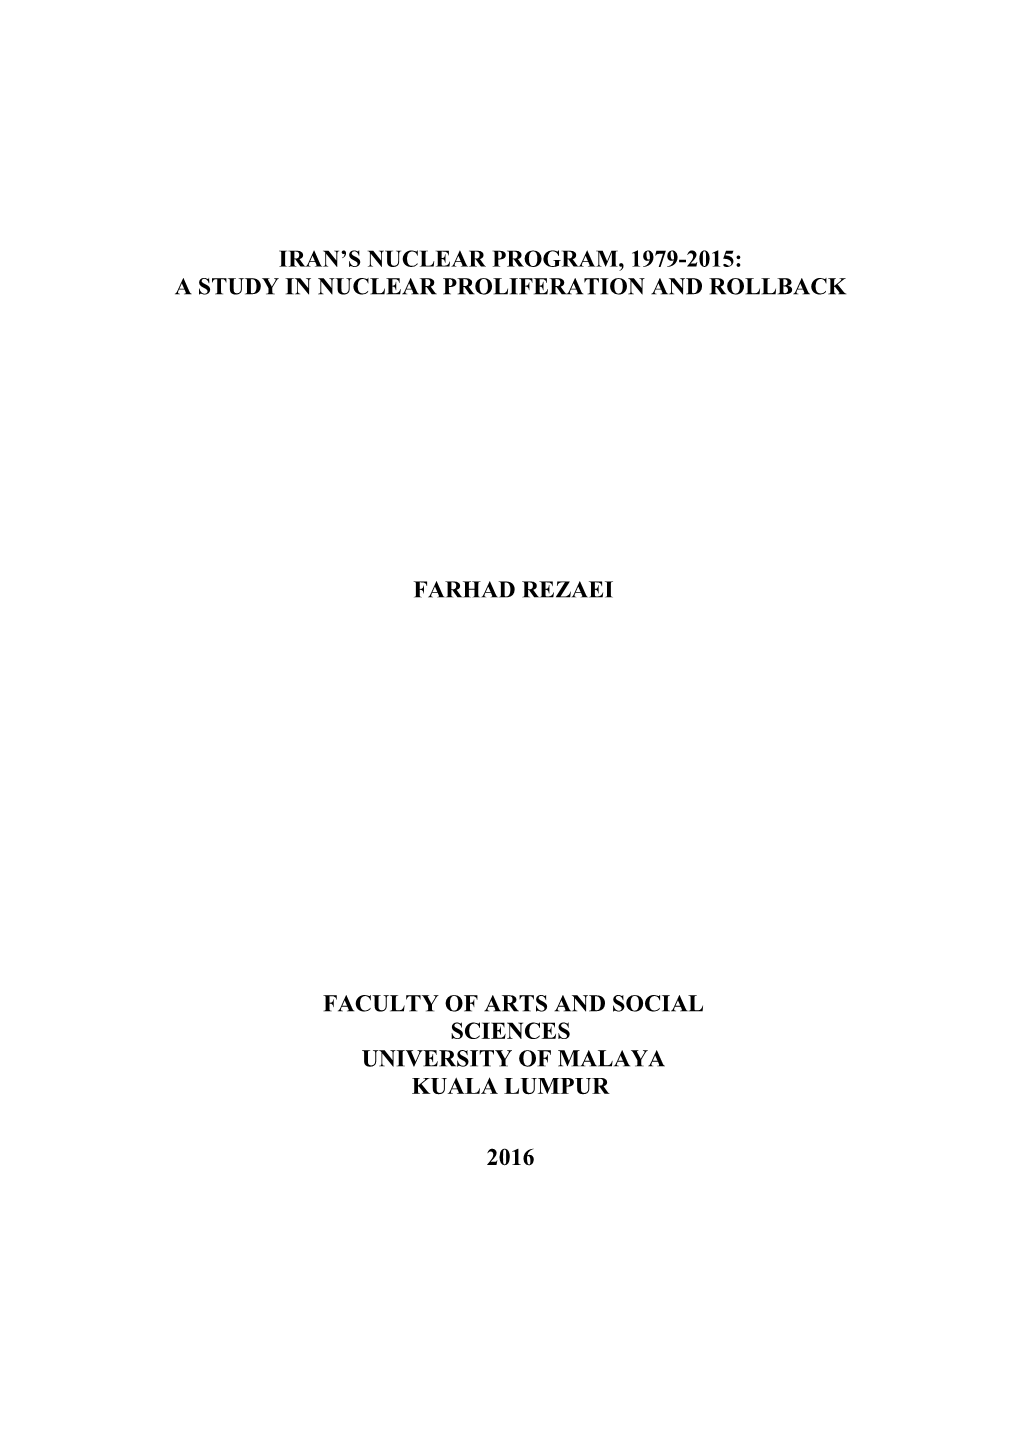 Iran's Nuclear Program, 1979-2015: a Study in Nuclear Proliferation and Rollback Farhad Rezaei Faculty of Arts and Social